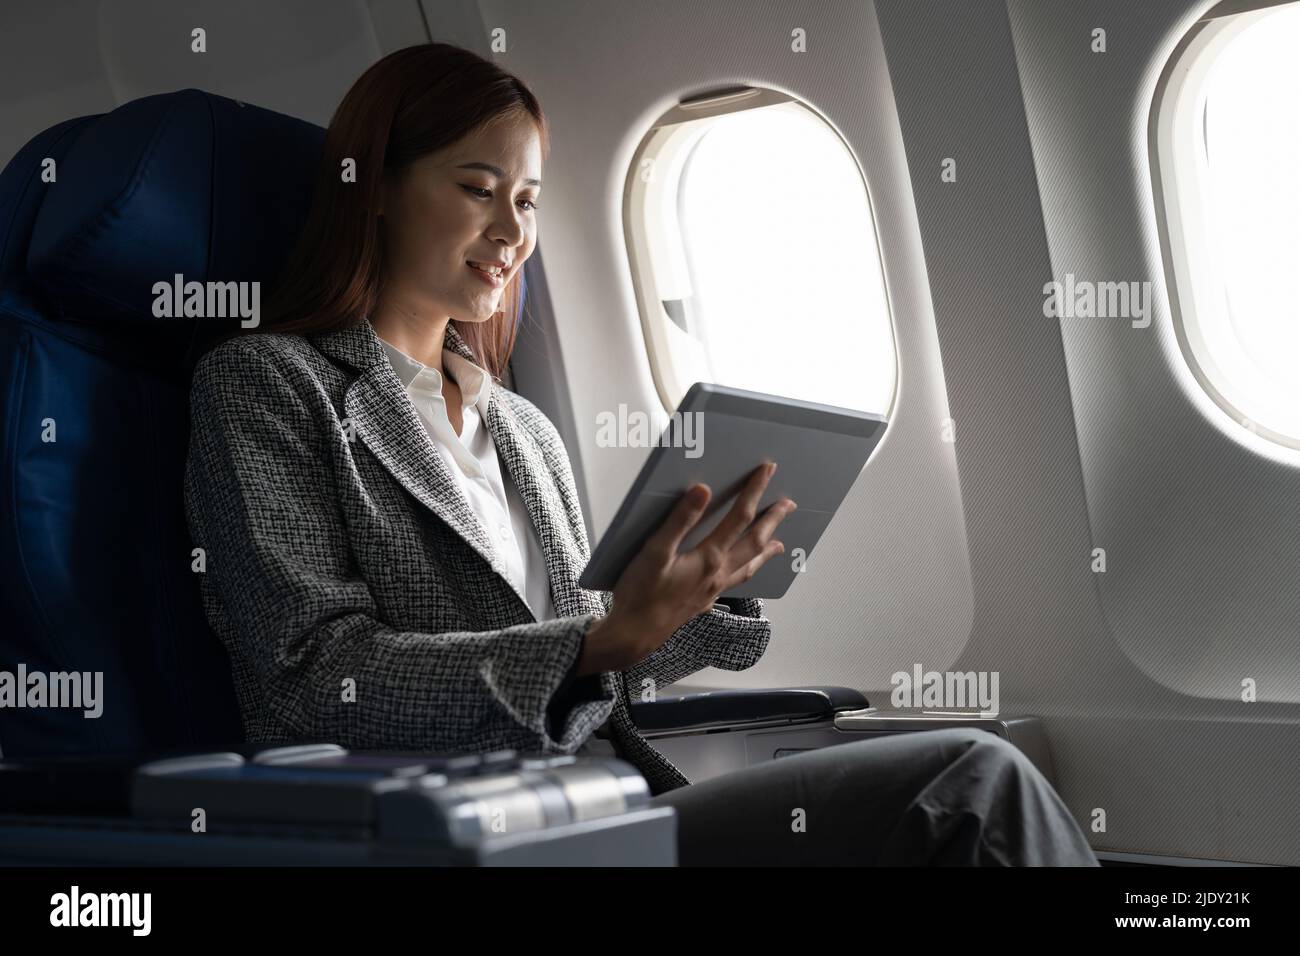 Travel and technology. Young asian woman in plane using digital tablet while sitting in airplane seat Stock Photo